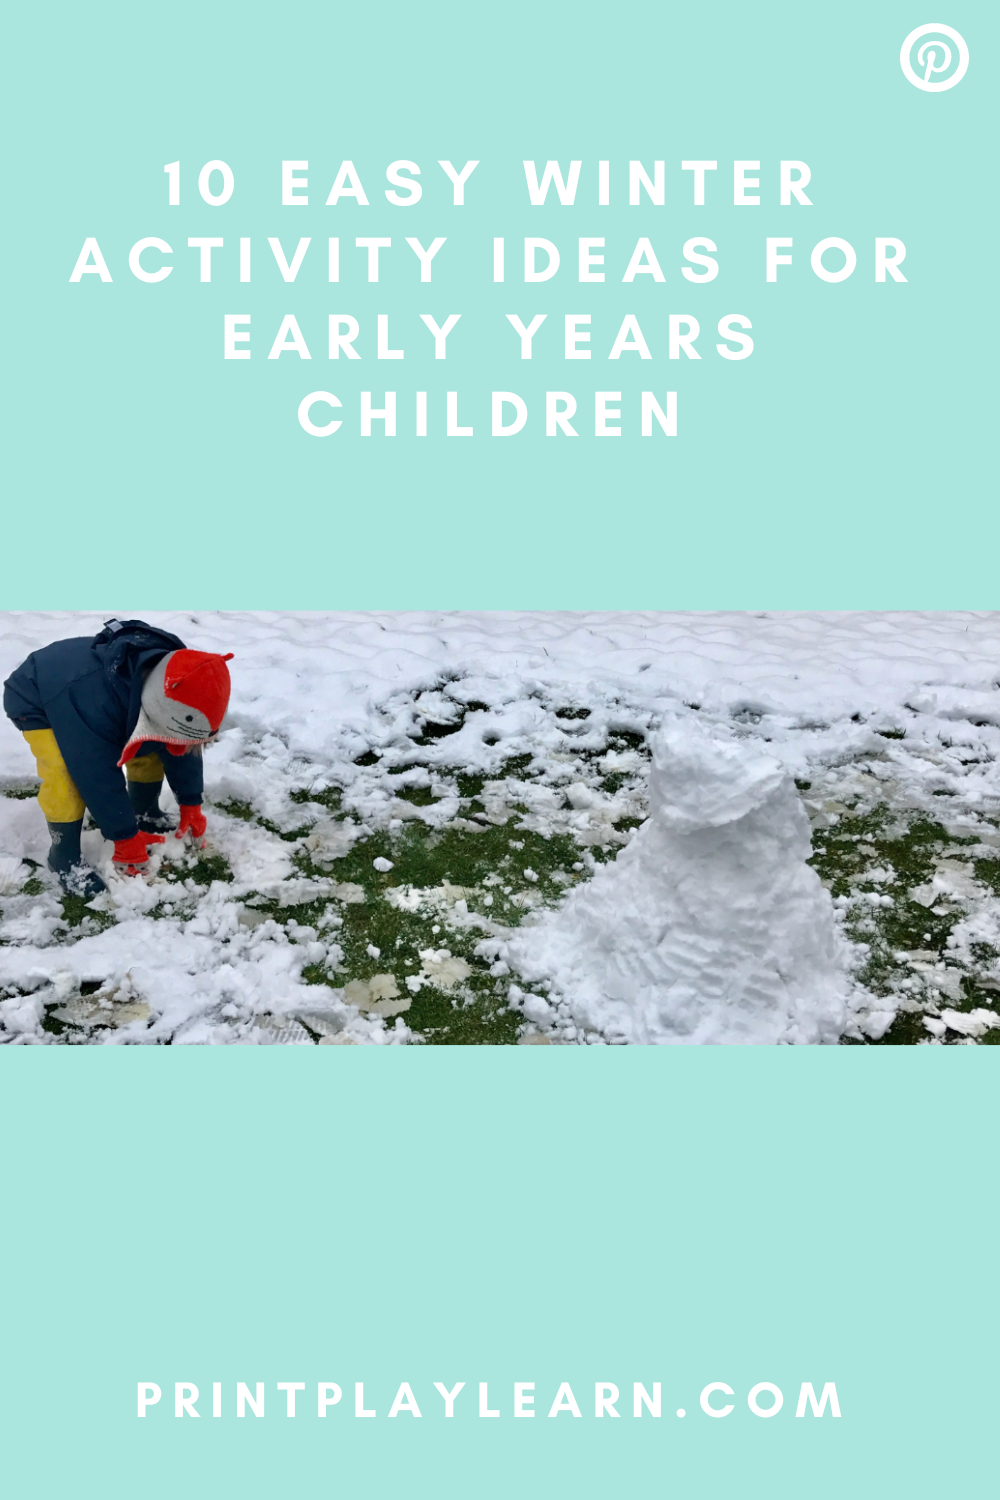 early years child playing in snow learning outdoors